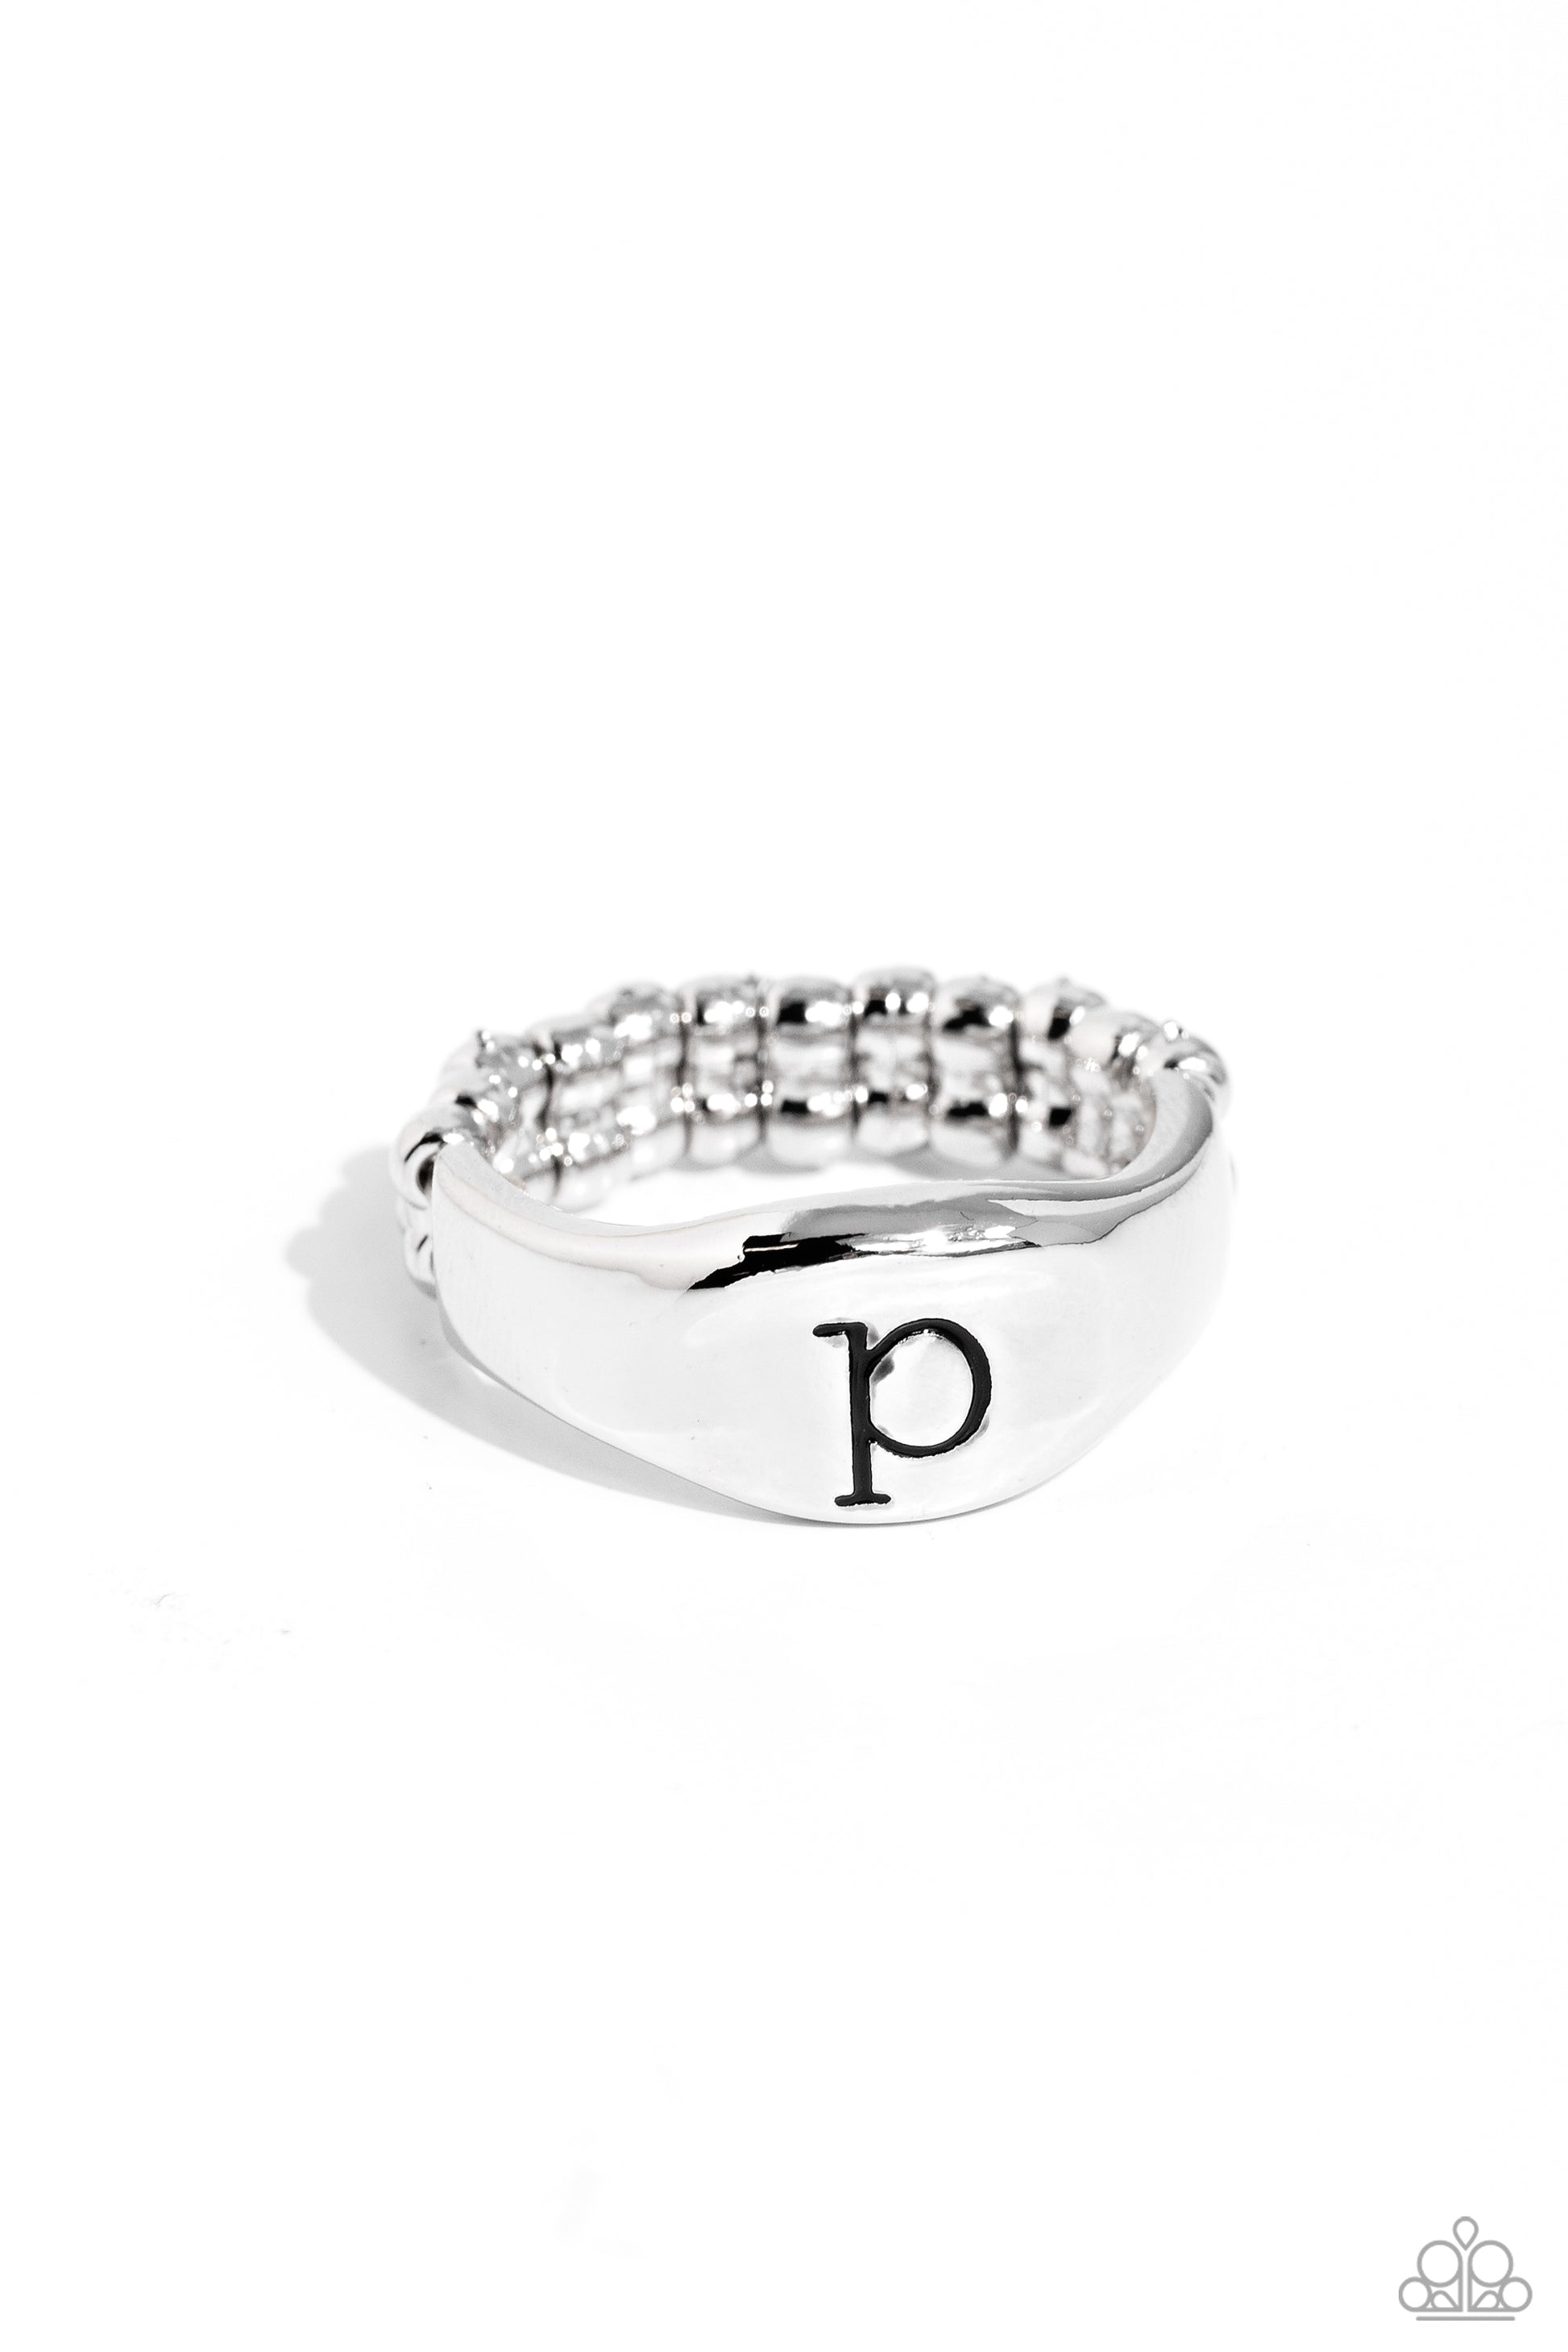 <p>Pressed into the center of a beveled silver band, the black letter "p" stands out for a simple, sentimental centerpiece. Features a stretchy band for a flexible fit.</p> <p><i> Sold as one individual ring.</i></p>